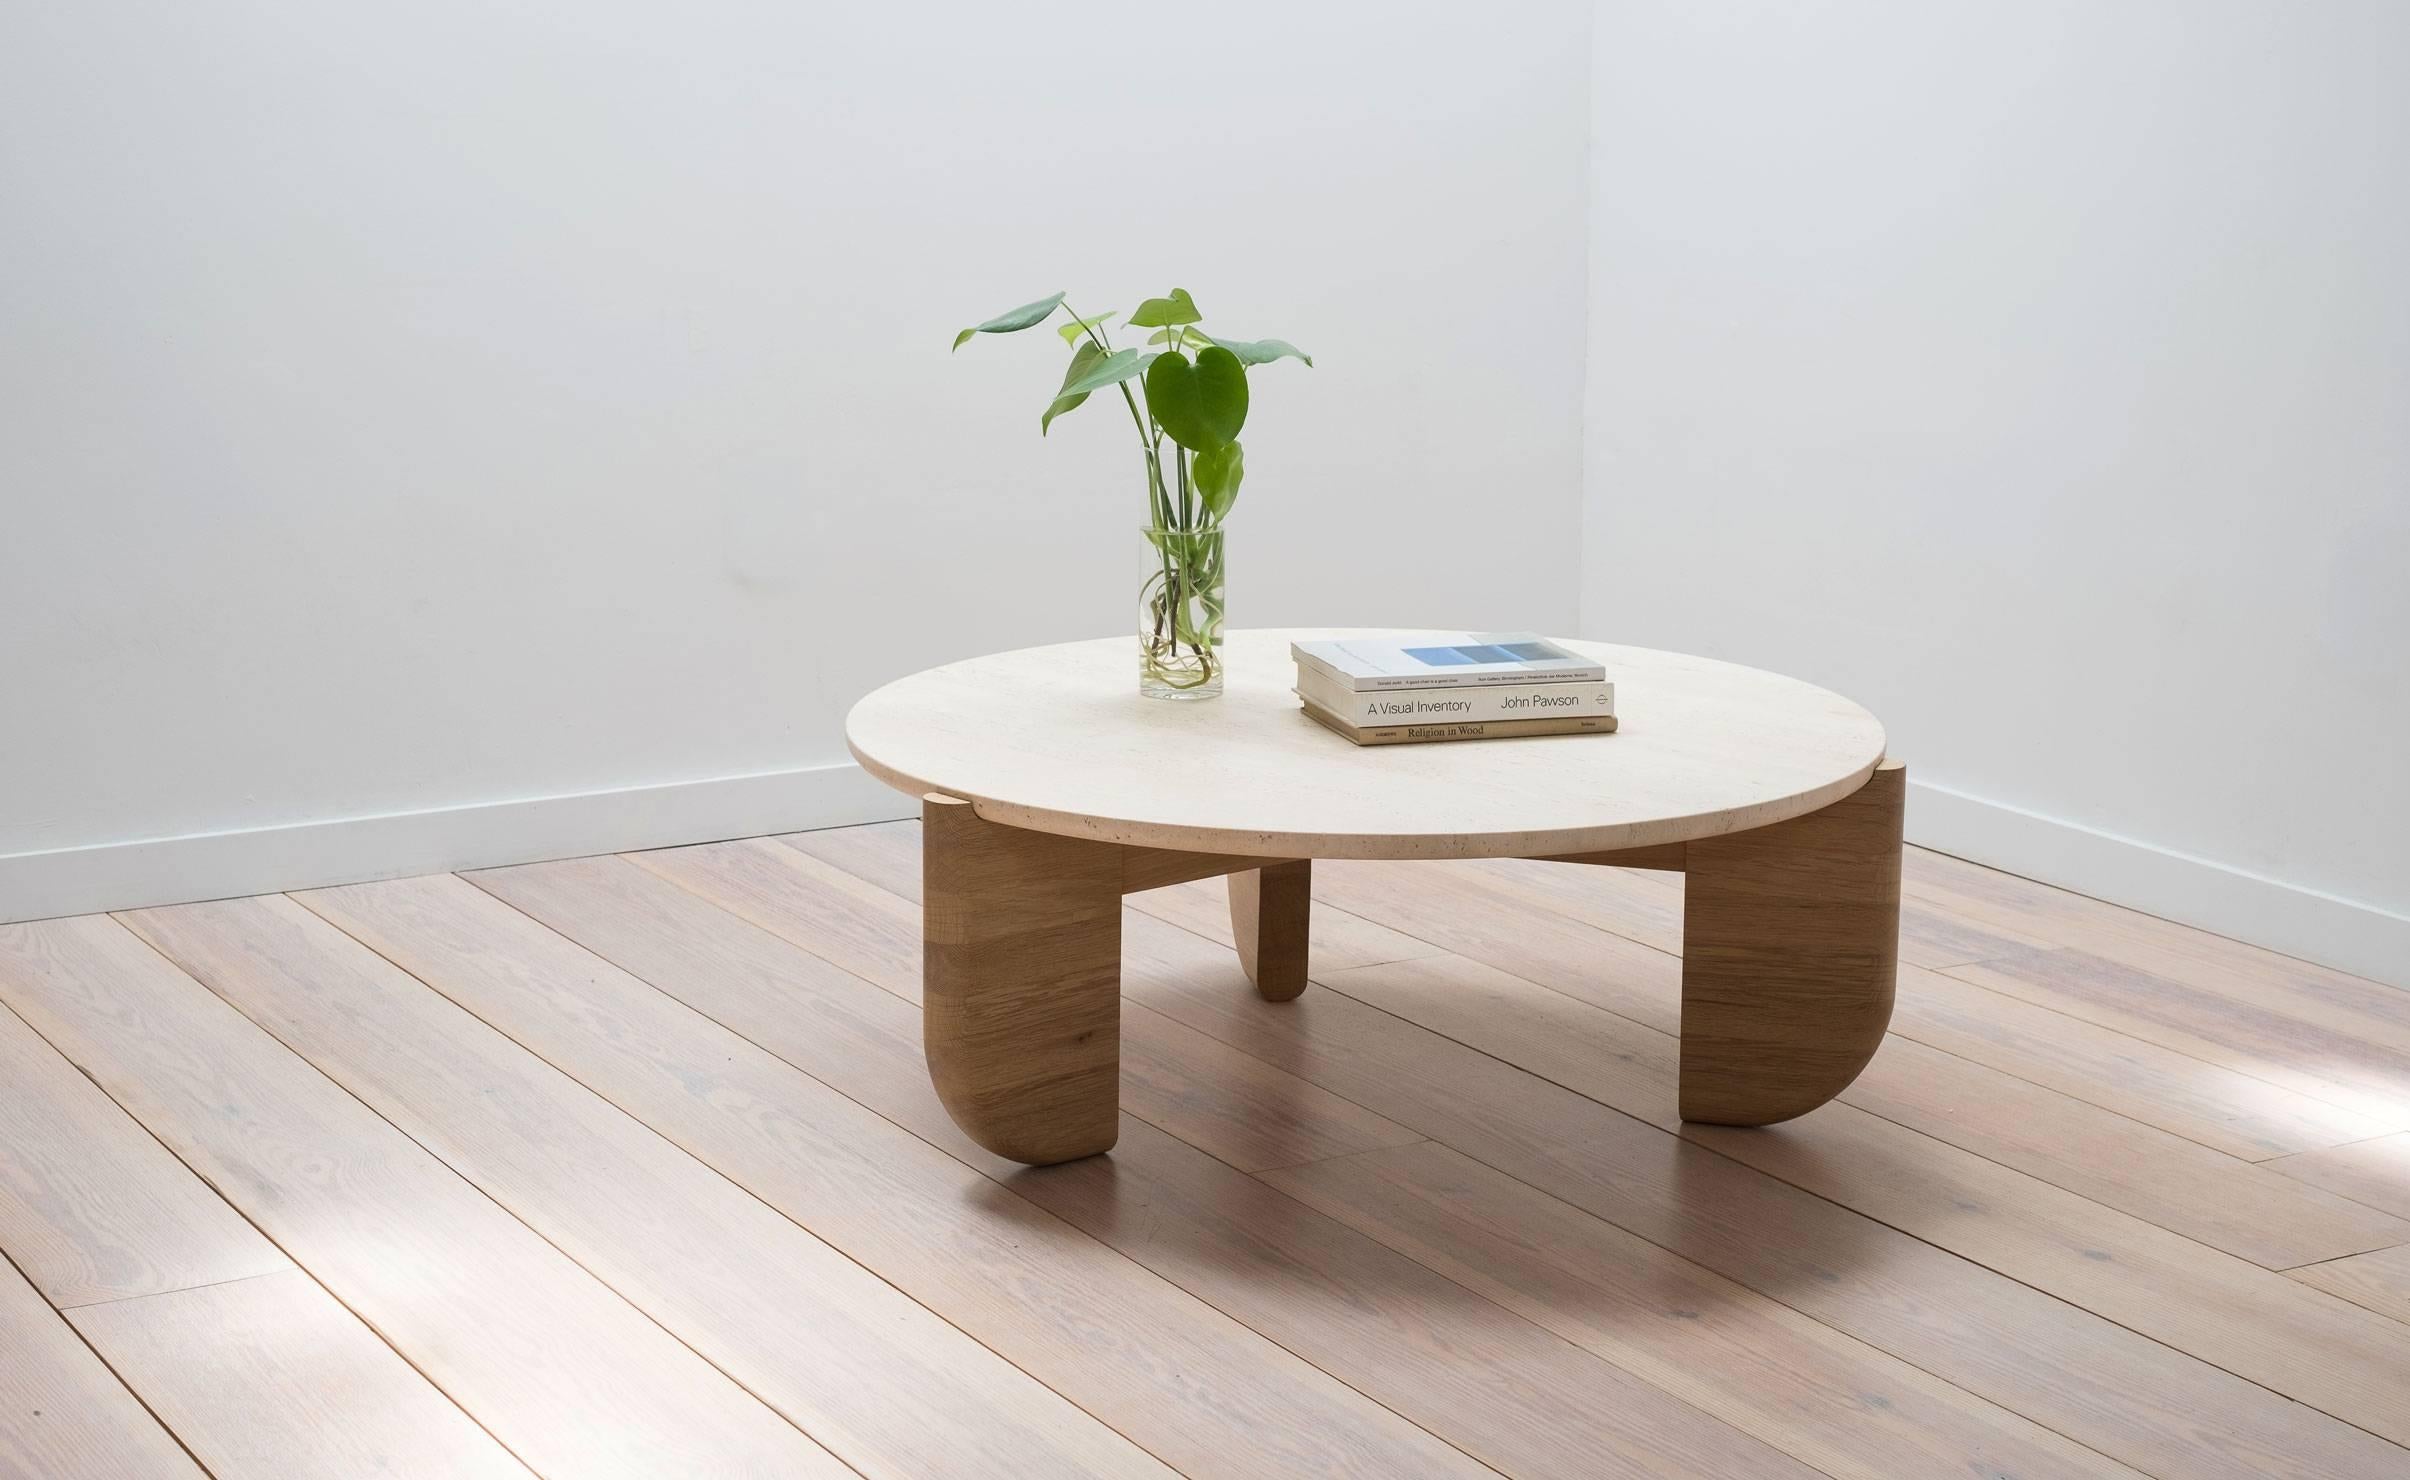 The Tripod Coffee Table is an exploration of material, texture, and form. The base and top were designed to fit together as one, with the bottom curve of the stone seated neatly in the inverse curve of the wooden legs. This piece is made by hand in